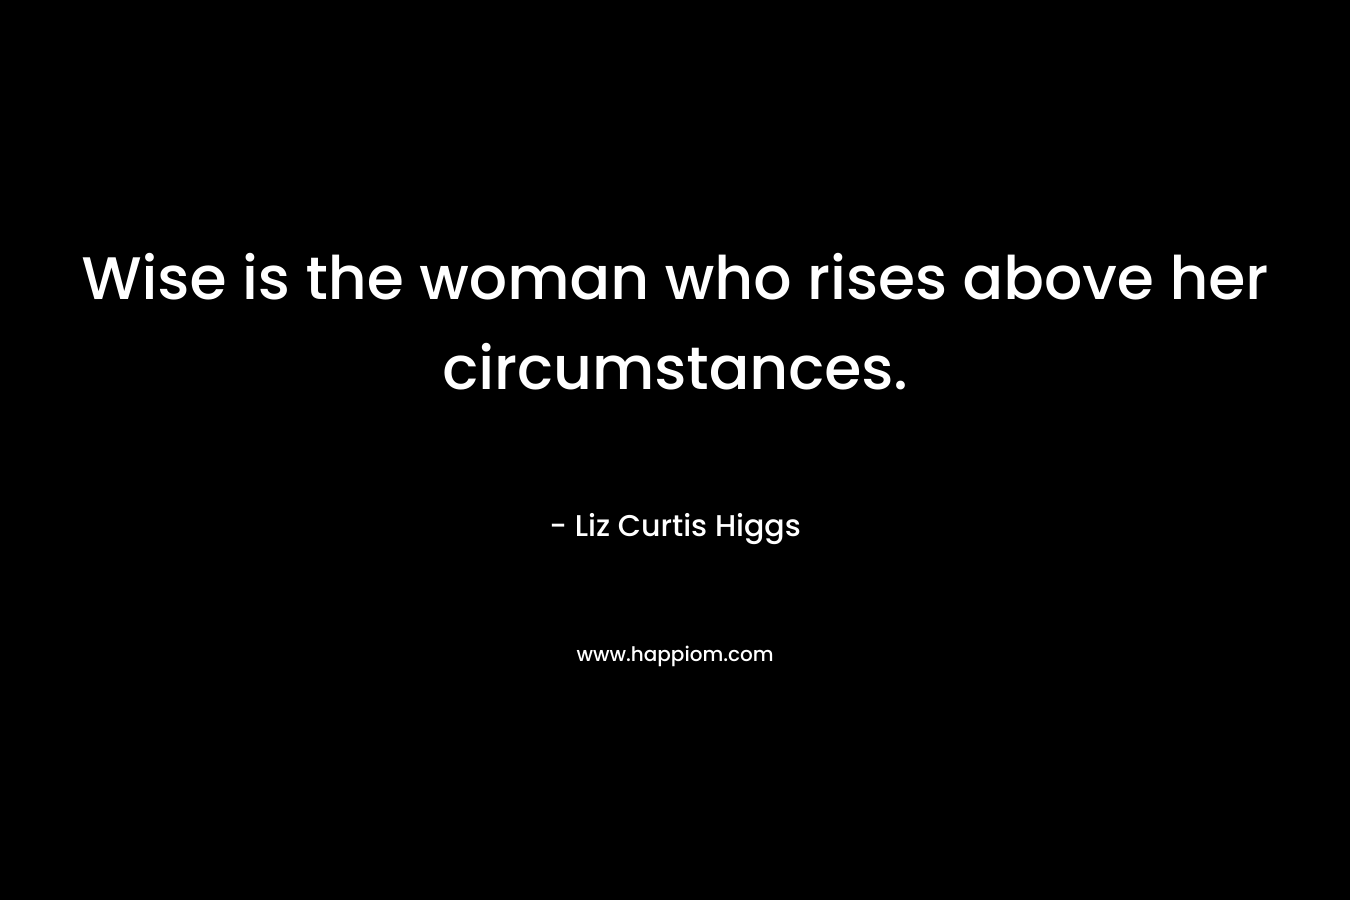 Wise is the woman who rises above her circumstances. – Liz Curtis Higgs